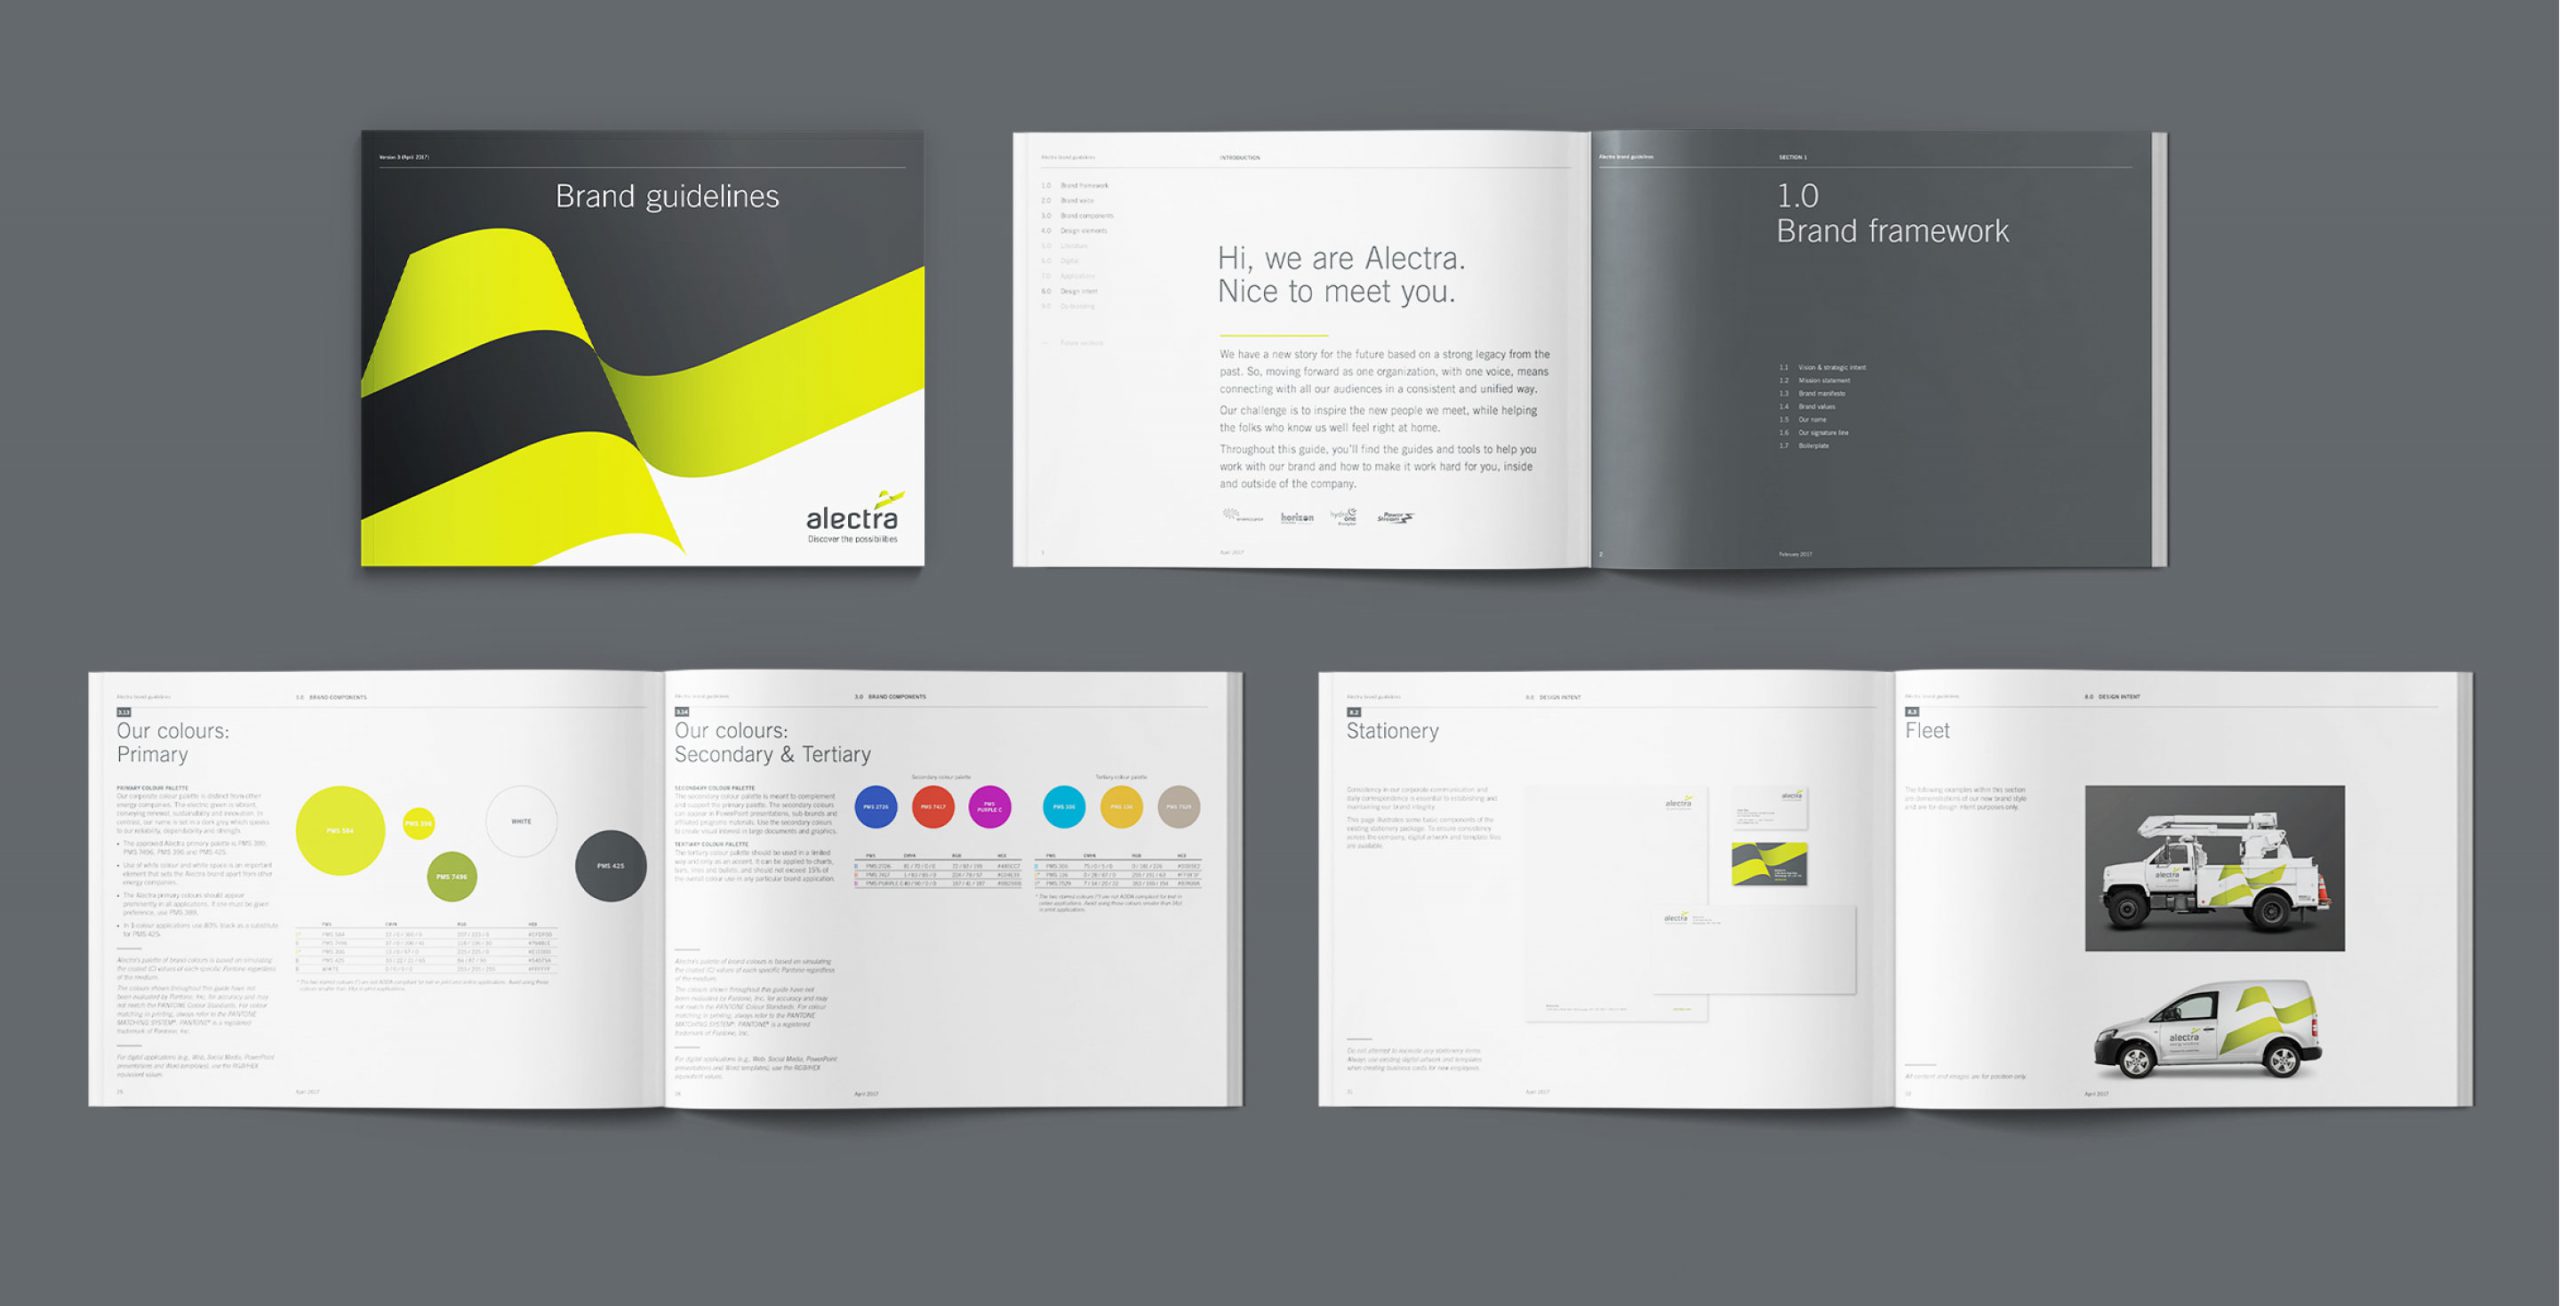 Sample pages from the Alectra Brand Guidelines manual.